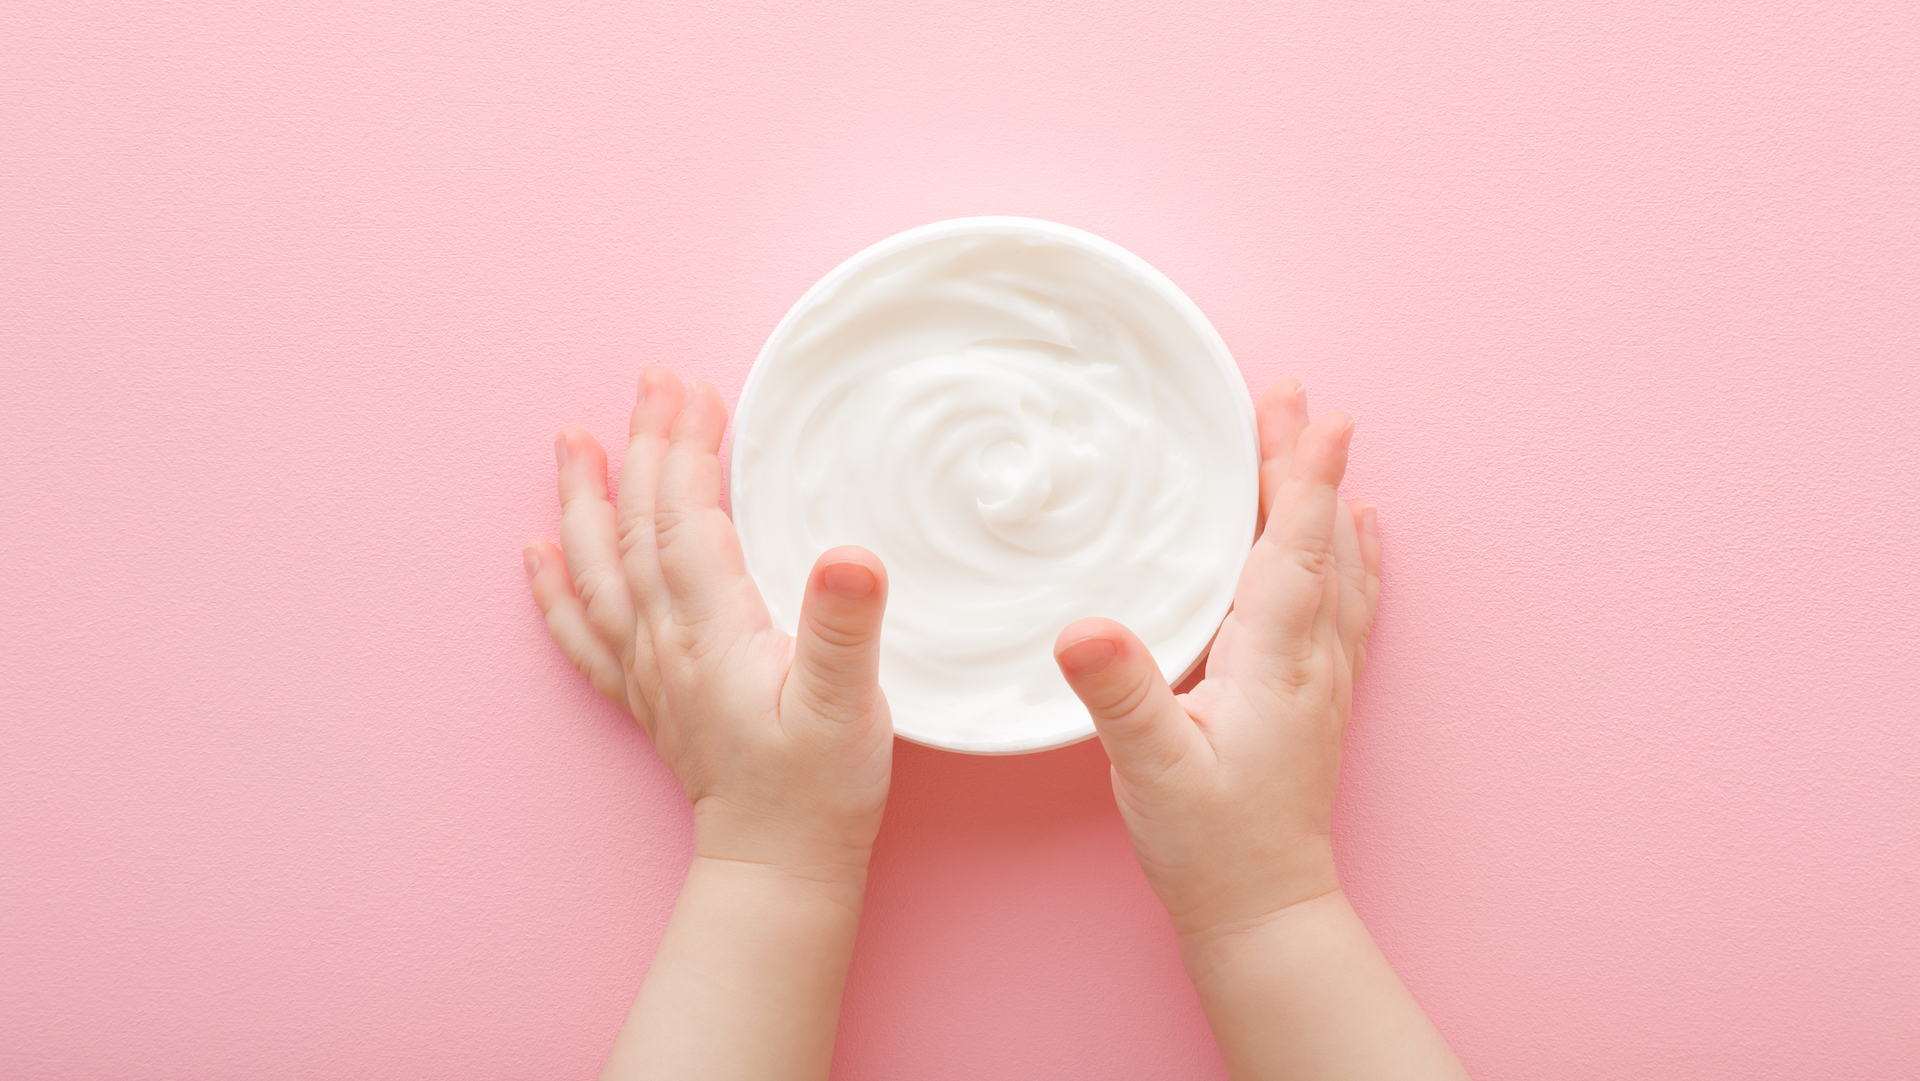 Baby girl little hands touching opened white cream jar on light pink table background.